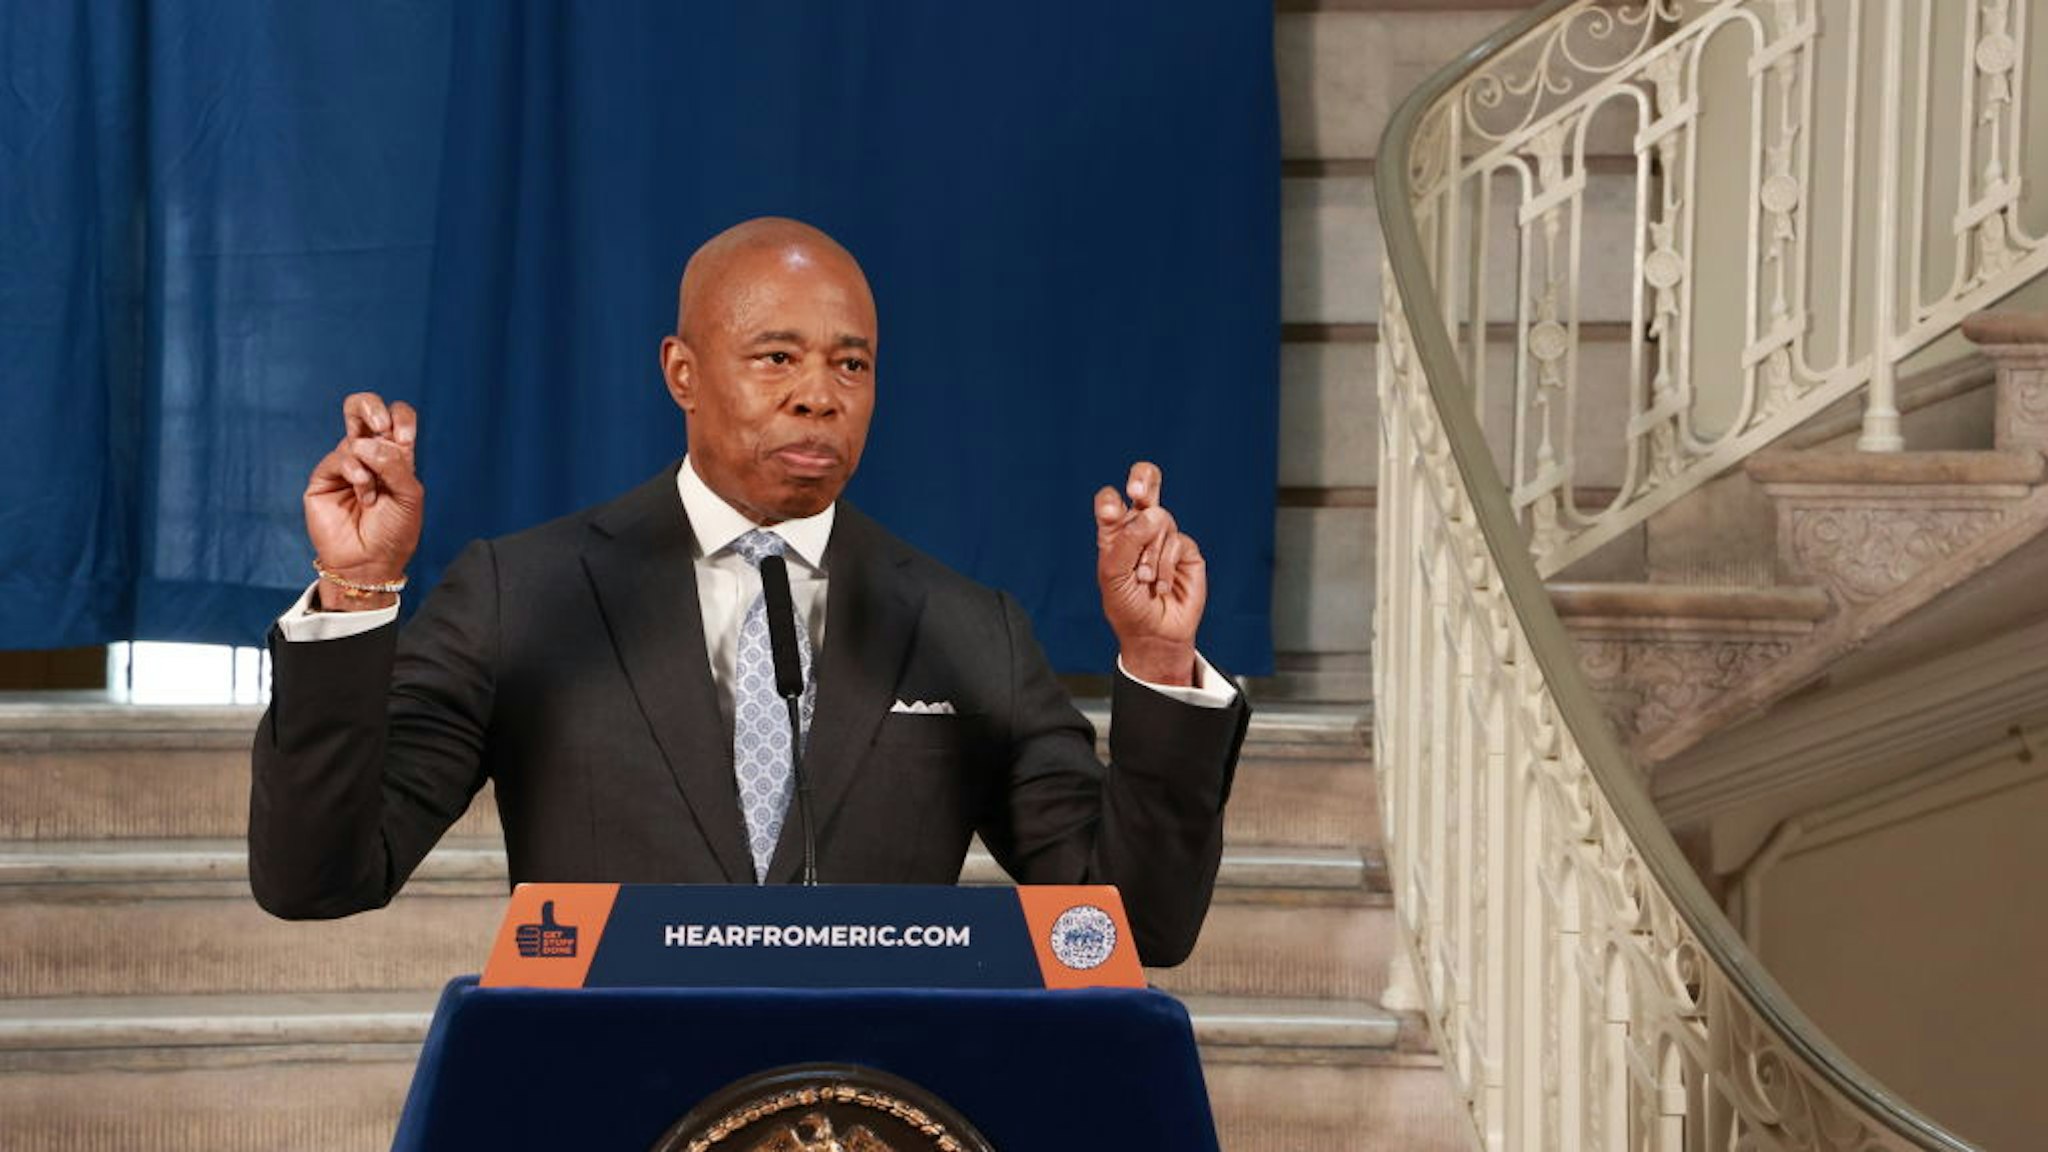 MANHATTAN - NY - June 13, 2023 - New York City Mayor Eric Adams is pictured during press conference at City Hall Rotunda Tuesday afternoon. During the press conference the Mayor announced a contract agreement with UFT.